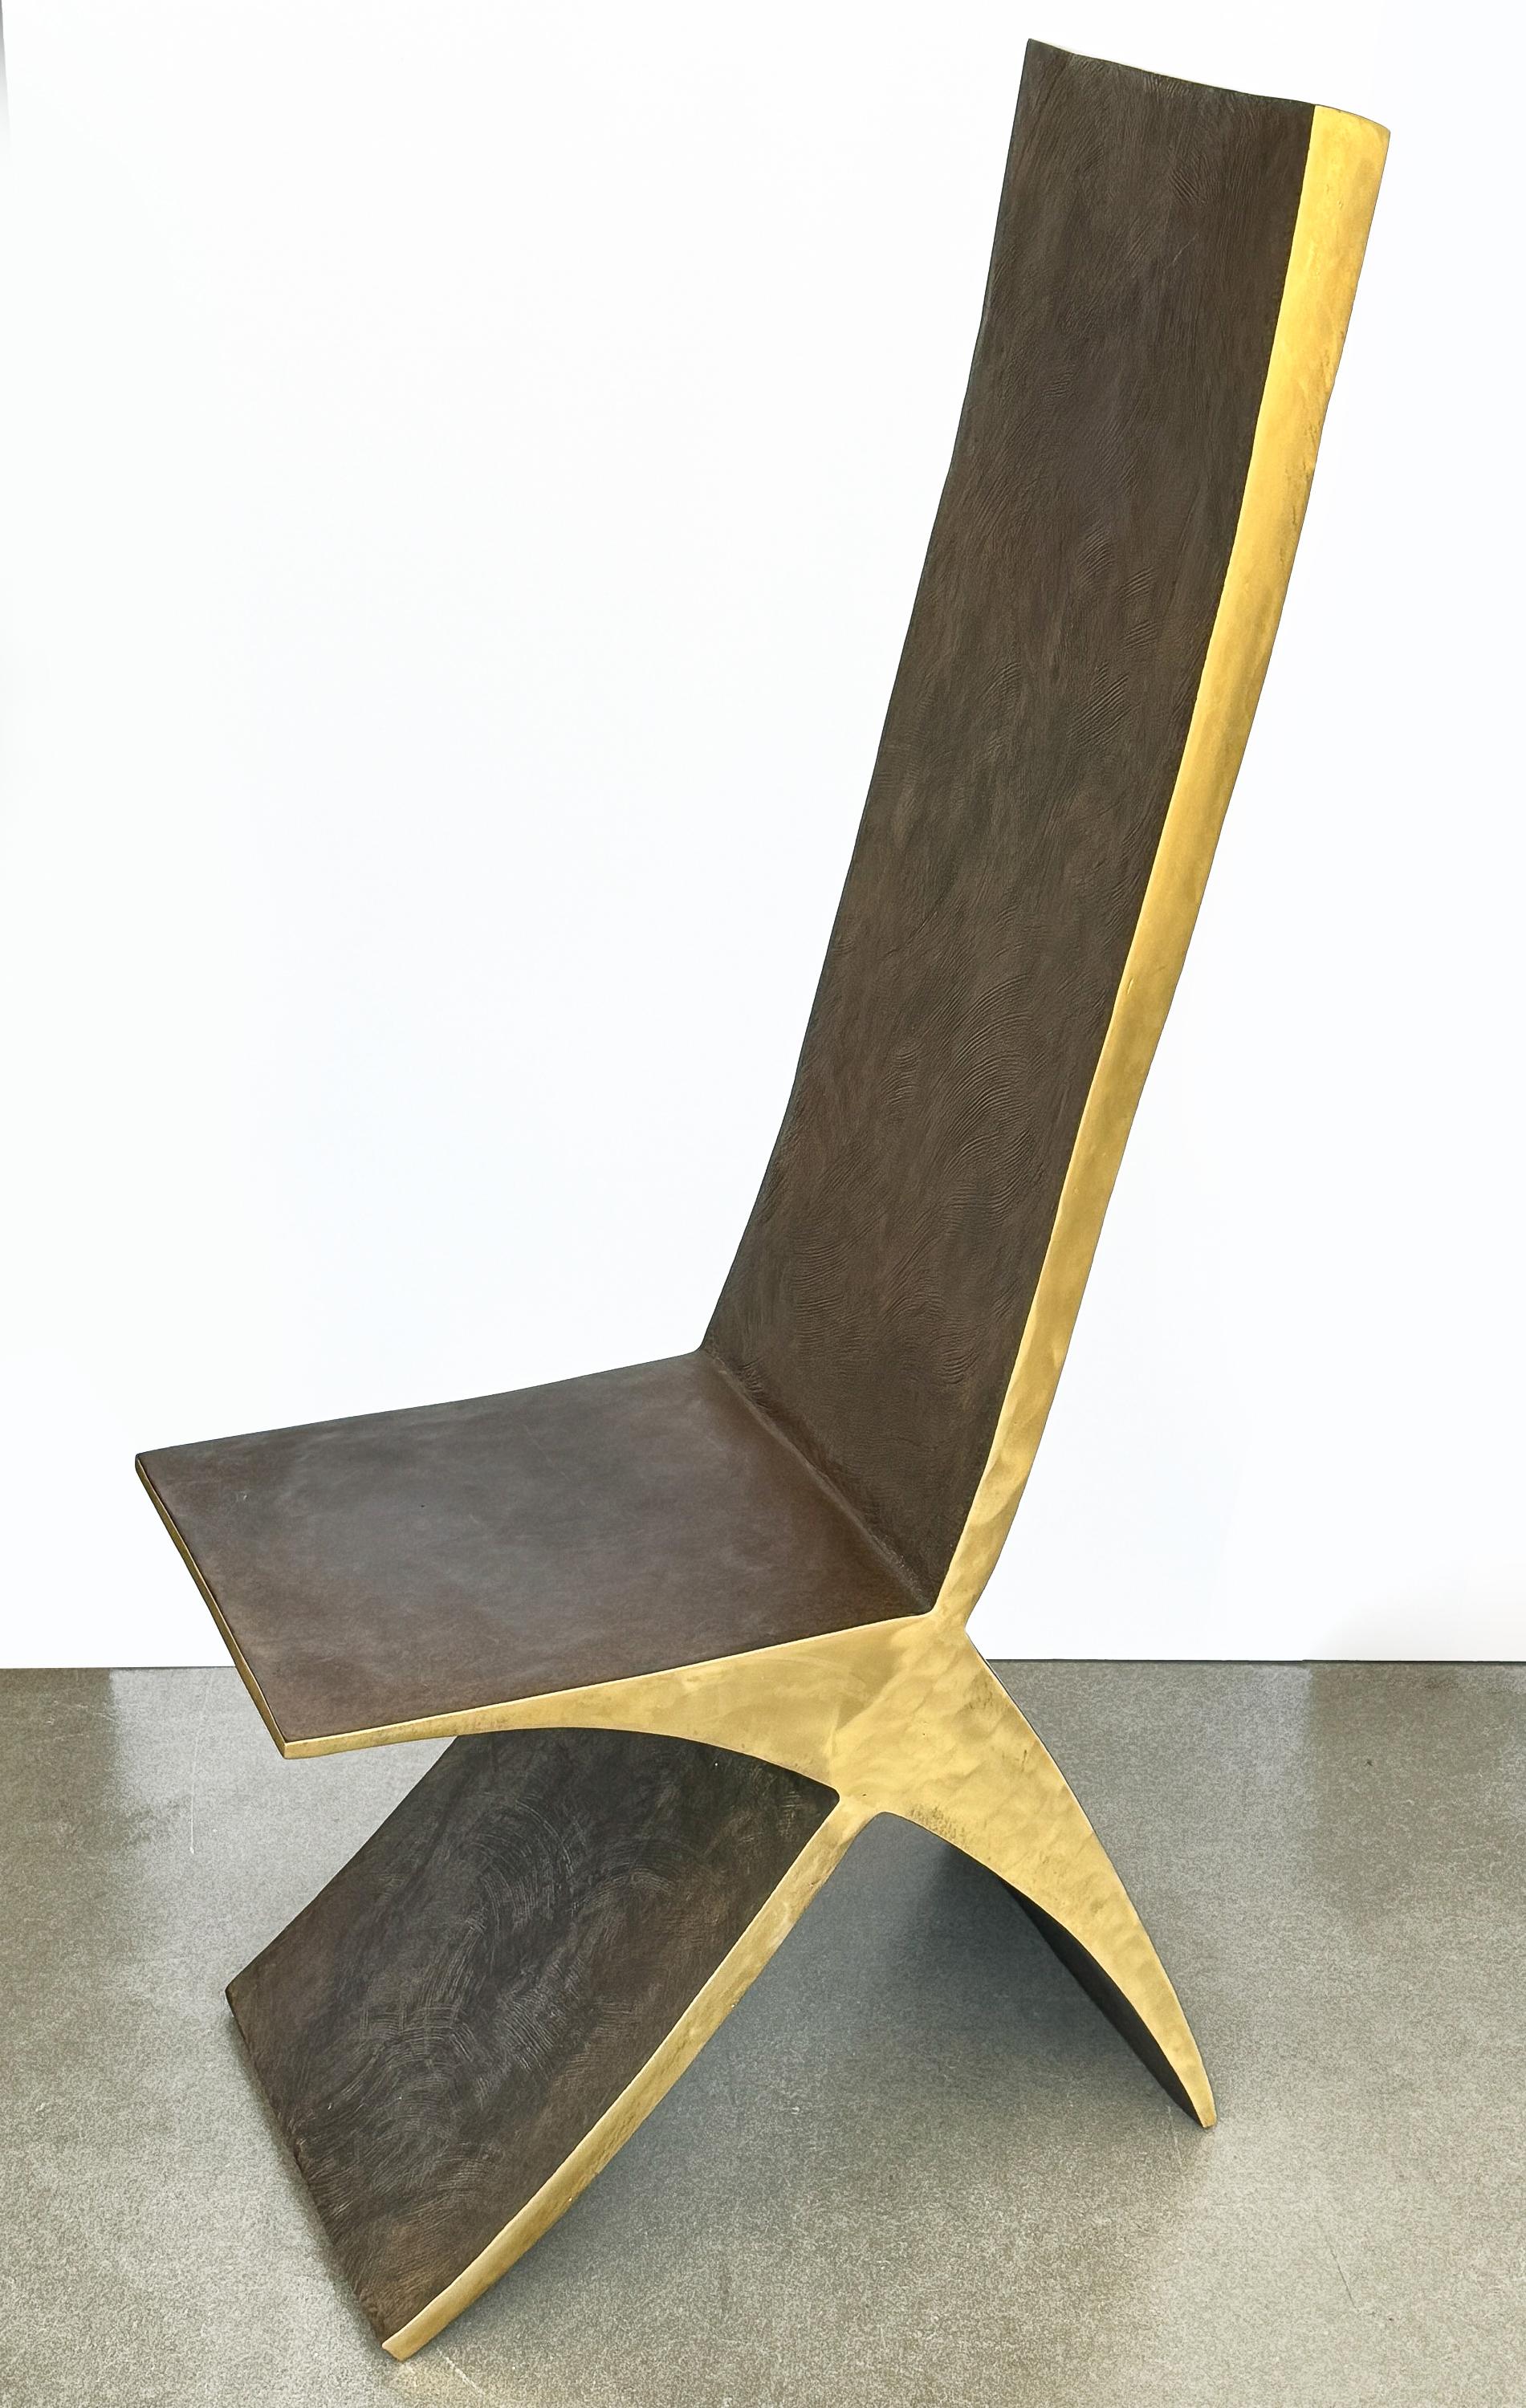 American Sculptural Bronze Chair by James Vilona For Sale